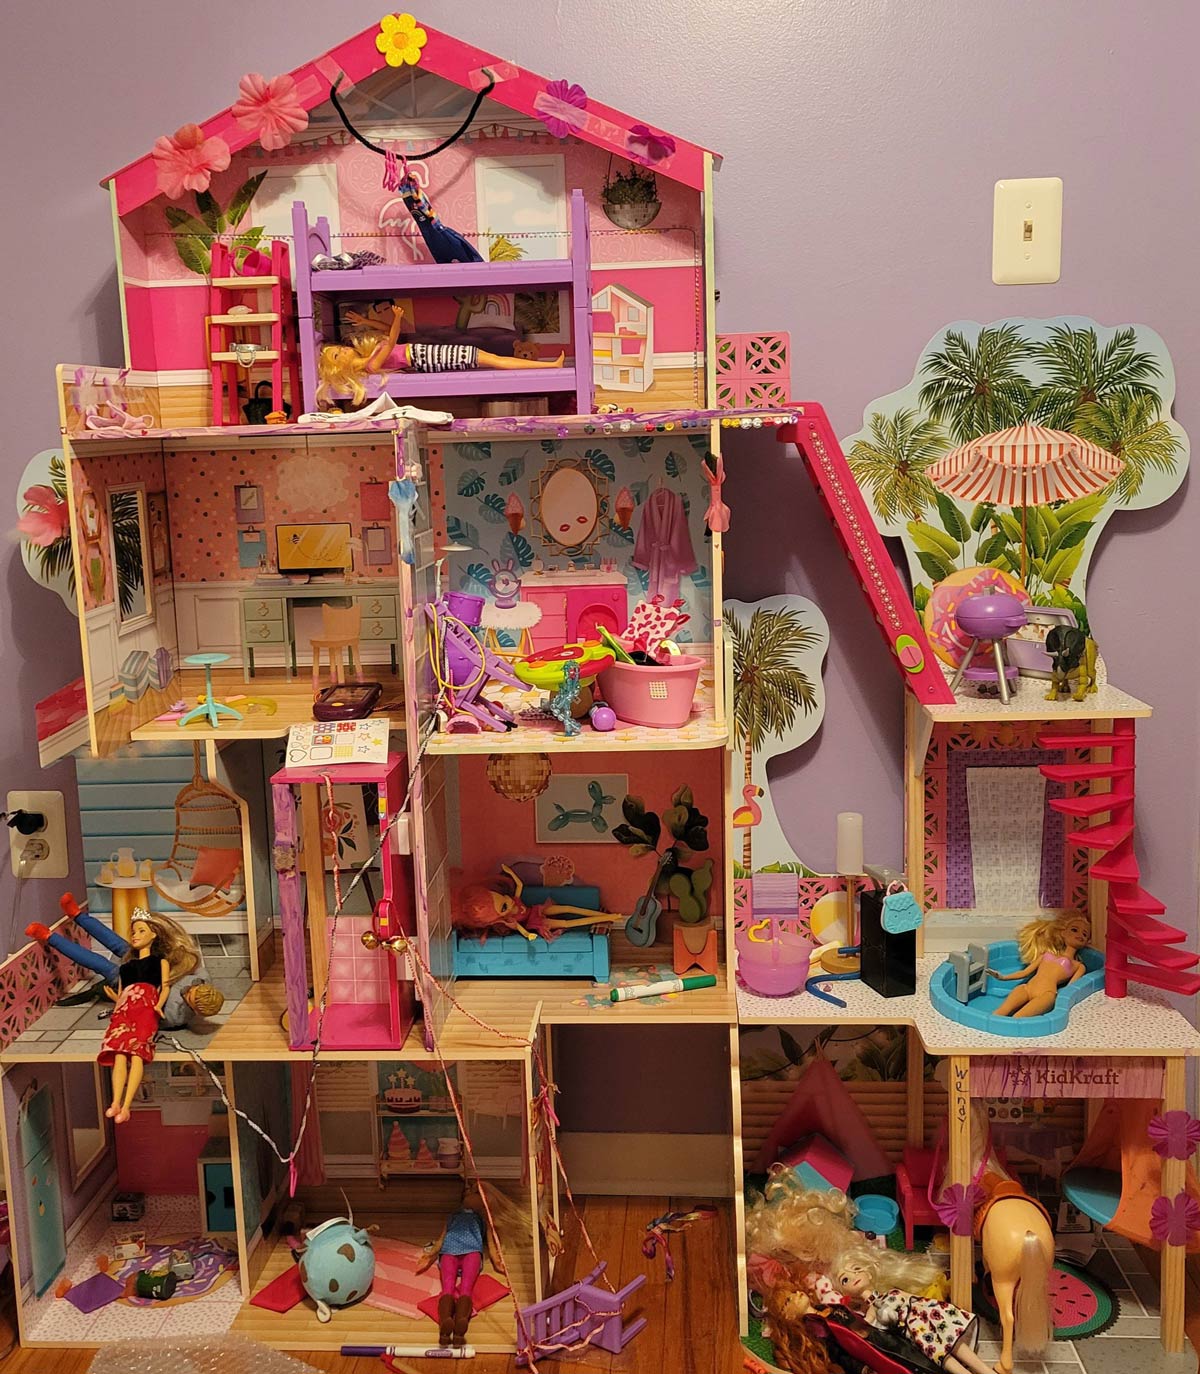 My 6-year-old's dollhouse looks like they had a sick party when she finished playing with it